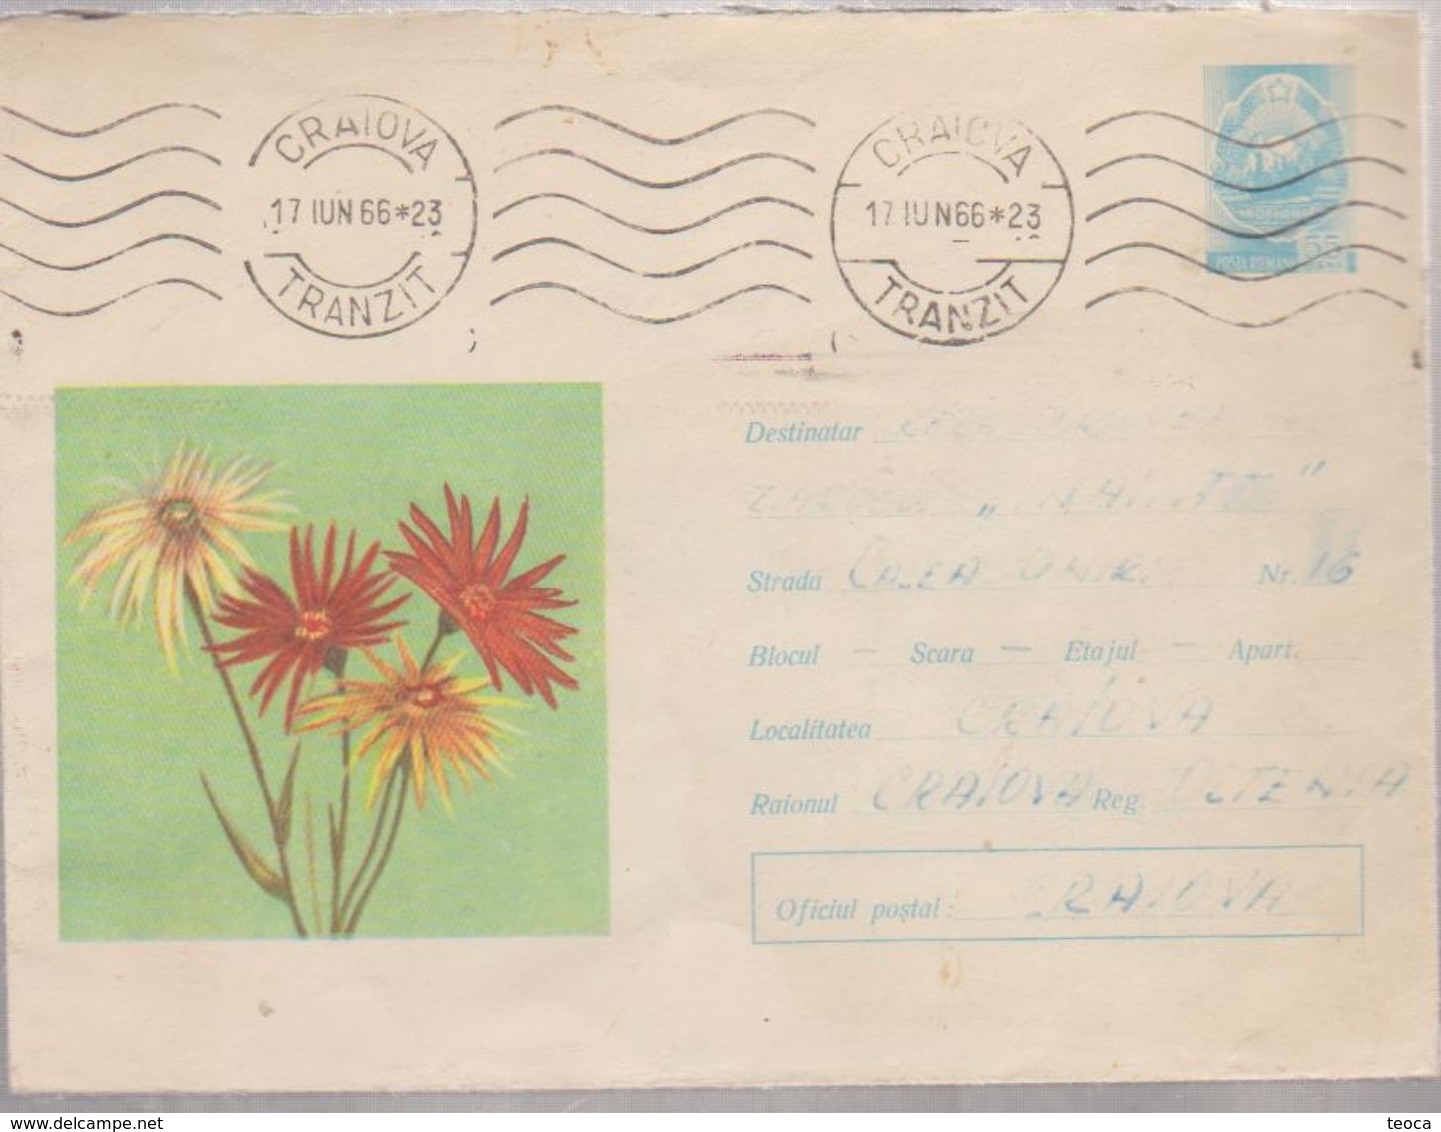 PLANT FLOWER, Cover Envelope ROMANIA 1966 COVER STATIONERY,POSTAL STATIONERY ROMANIA 1966, CANCEL  CRAIOVA - Covers & Documents